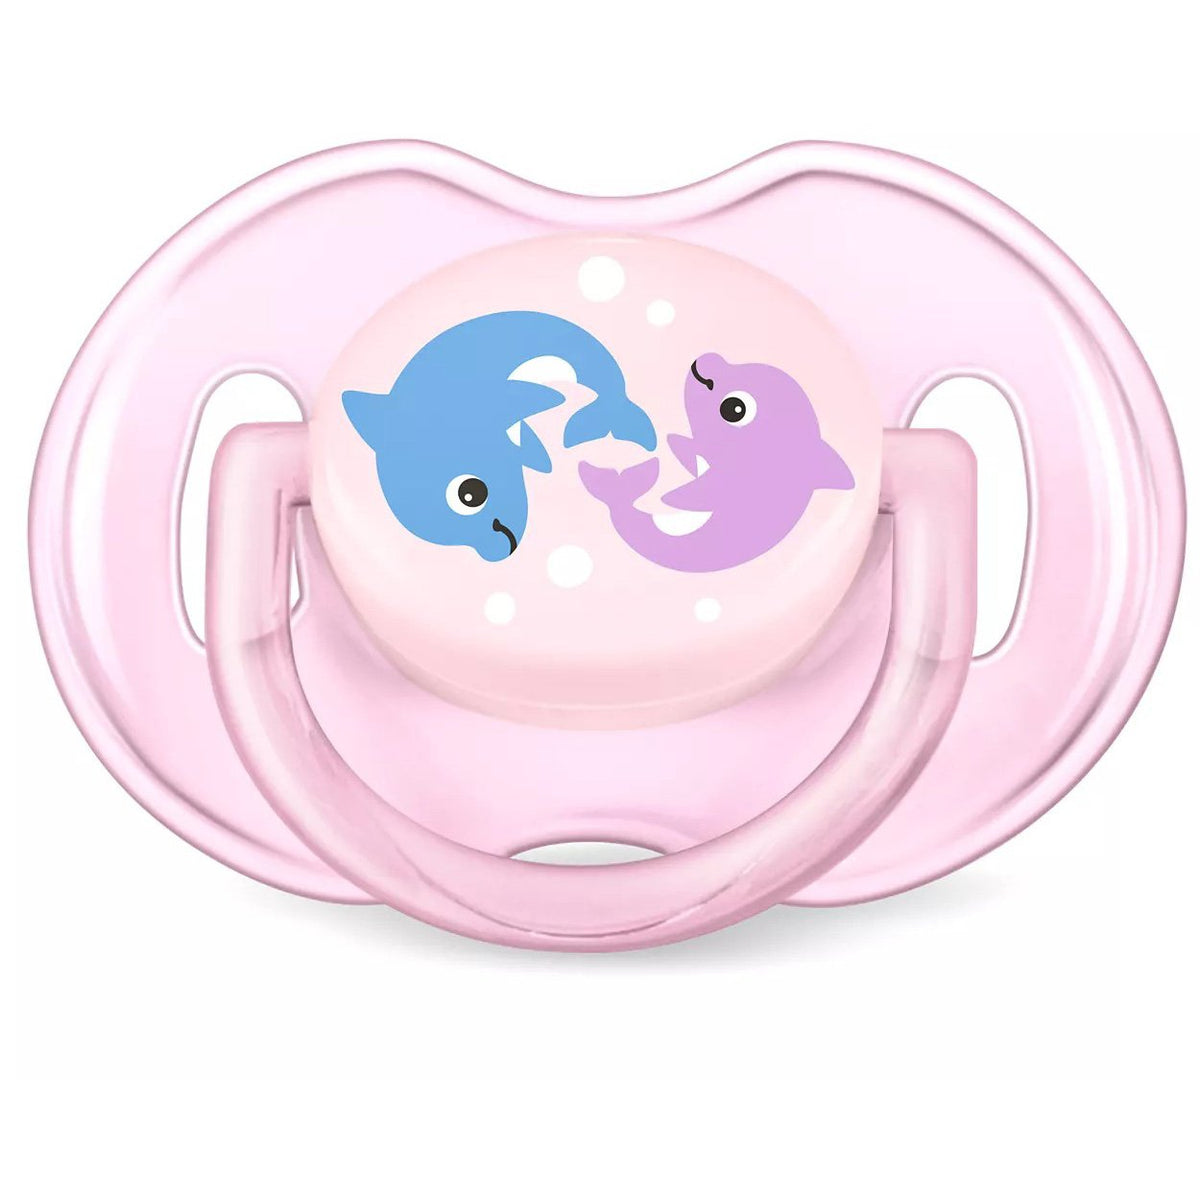 philips-avent-classic-pacifier- (3)